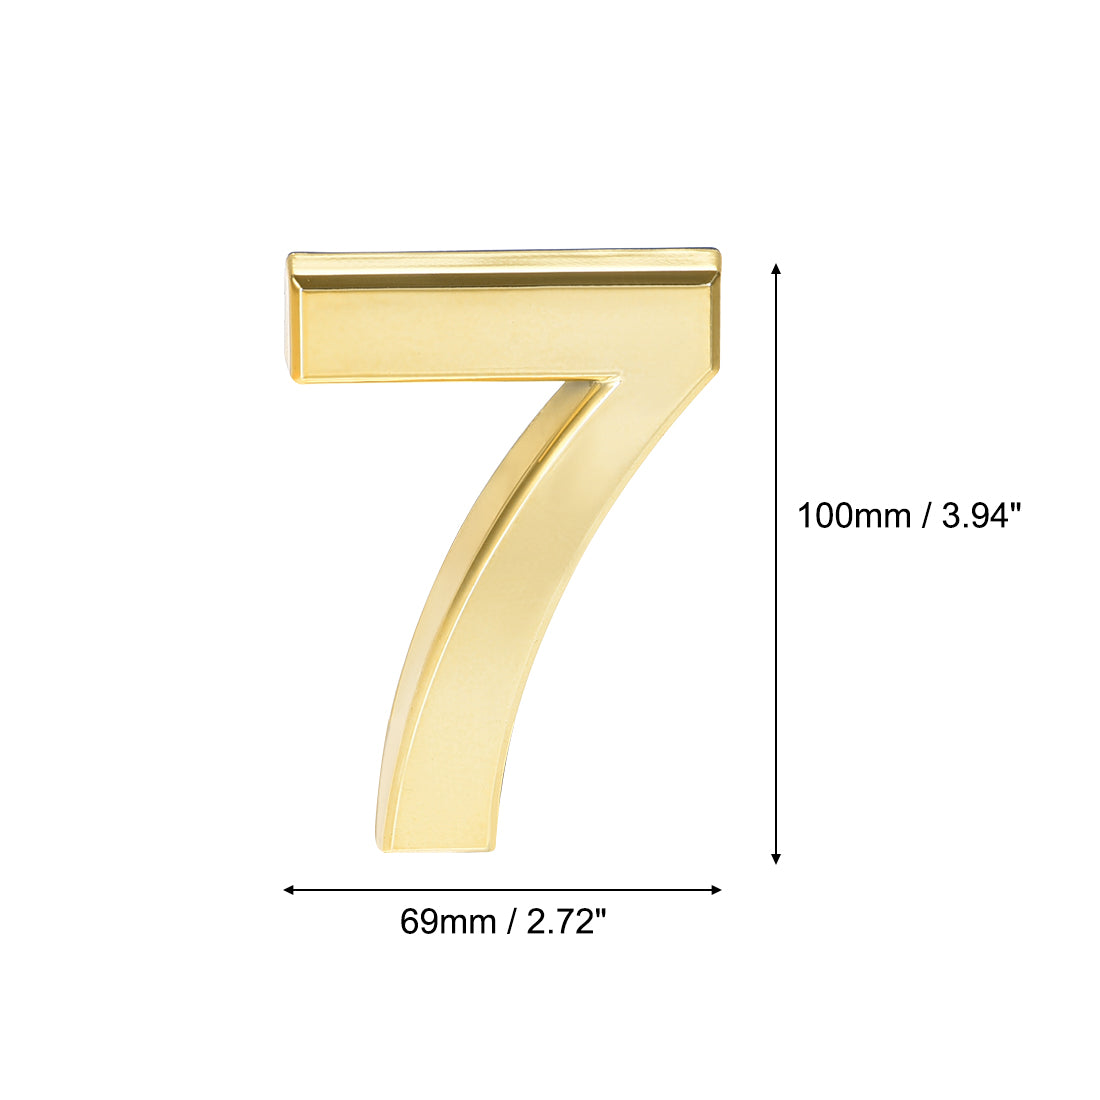 Uxcell Uxcell Self Adhesive House Number 3.94 Inch ABS Plastic Number 9 for House Hotel Mailbox Address Sign Gold Tone